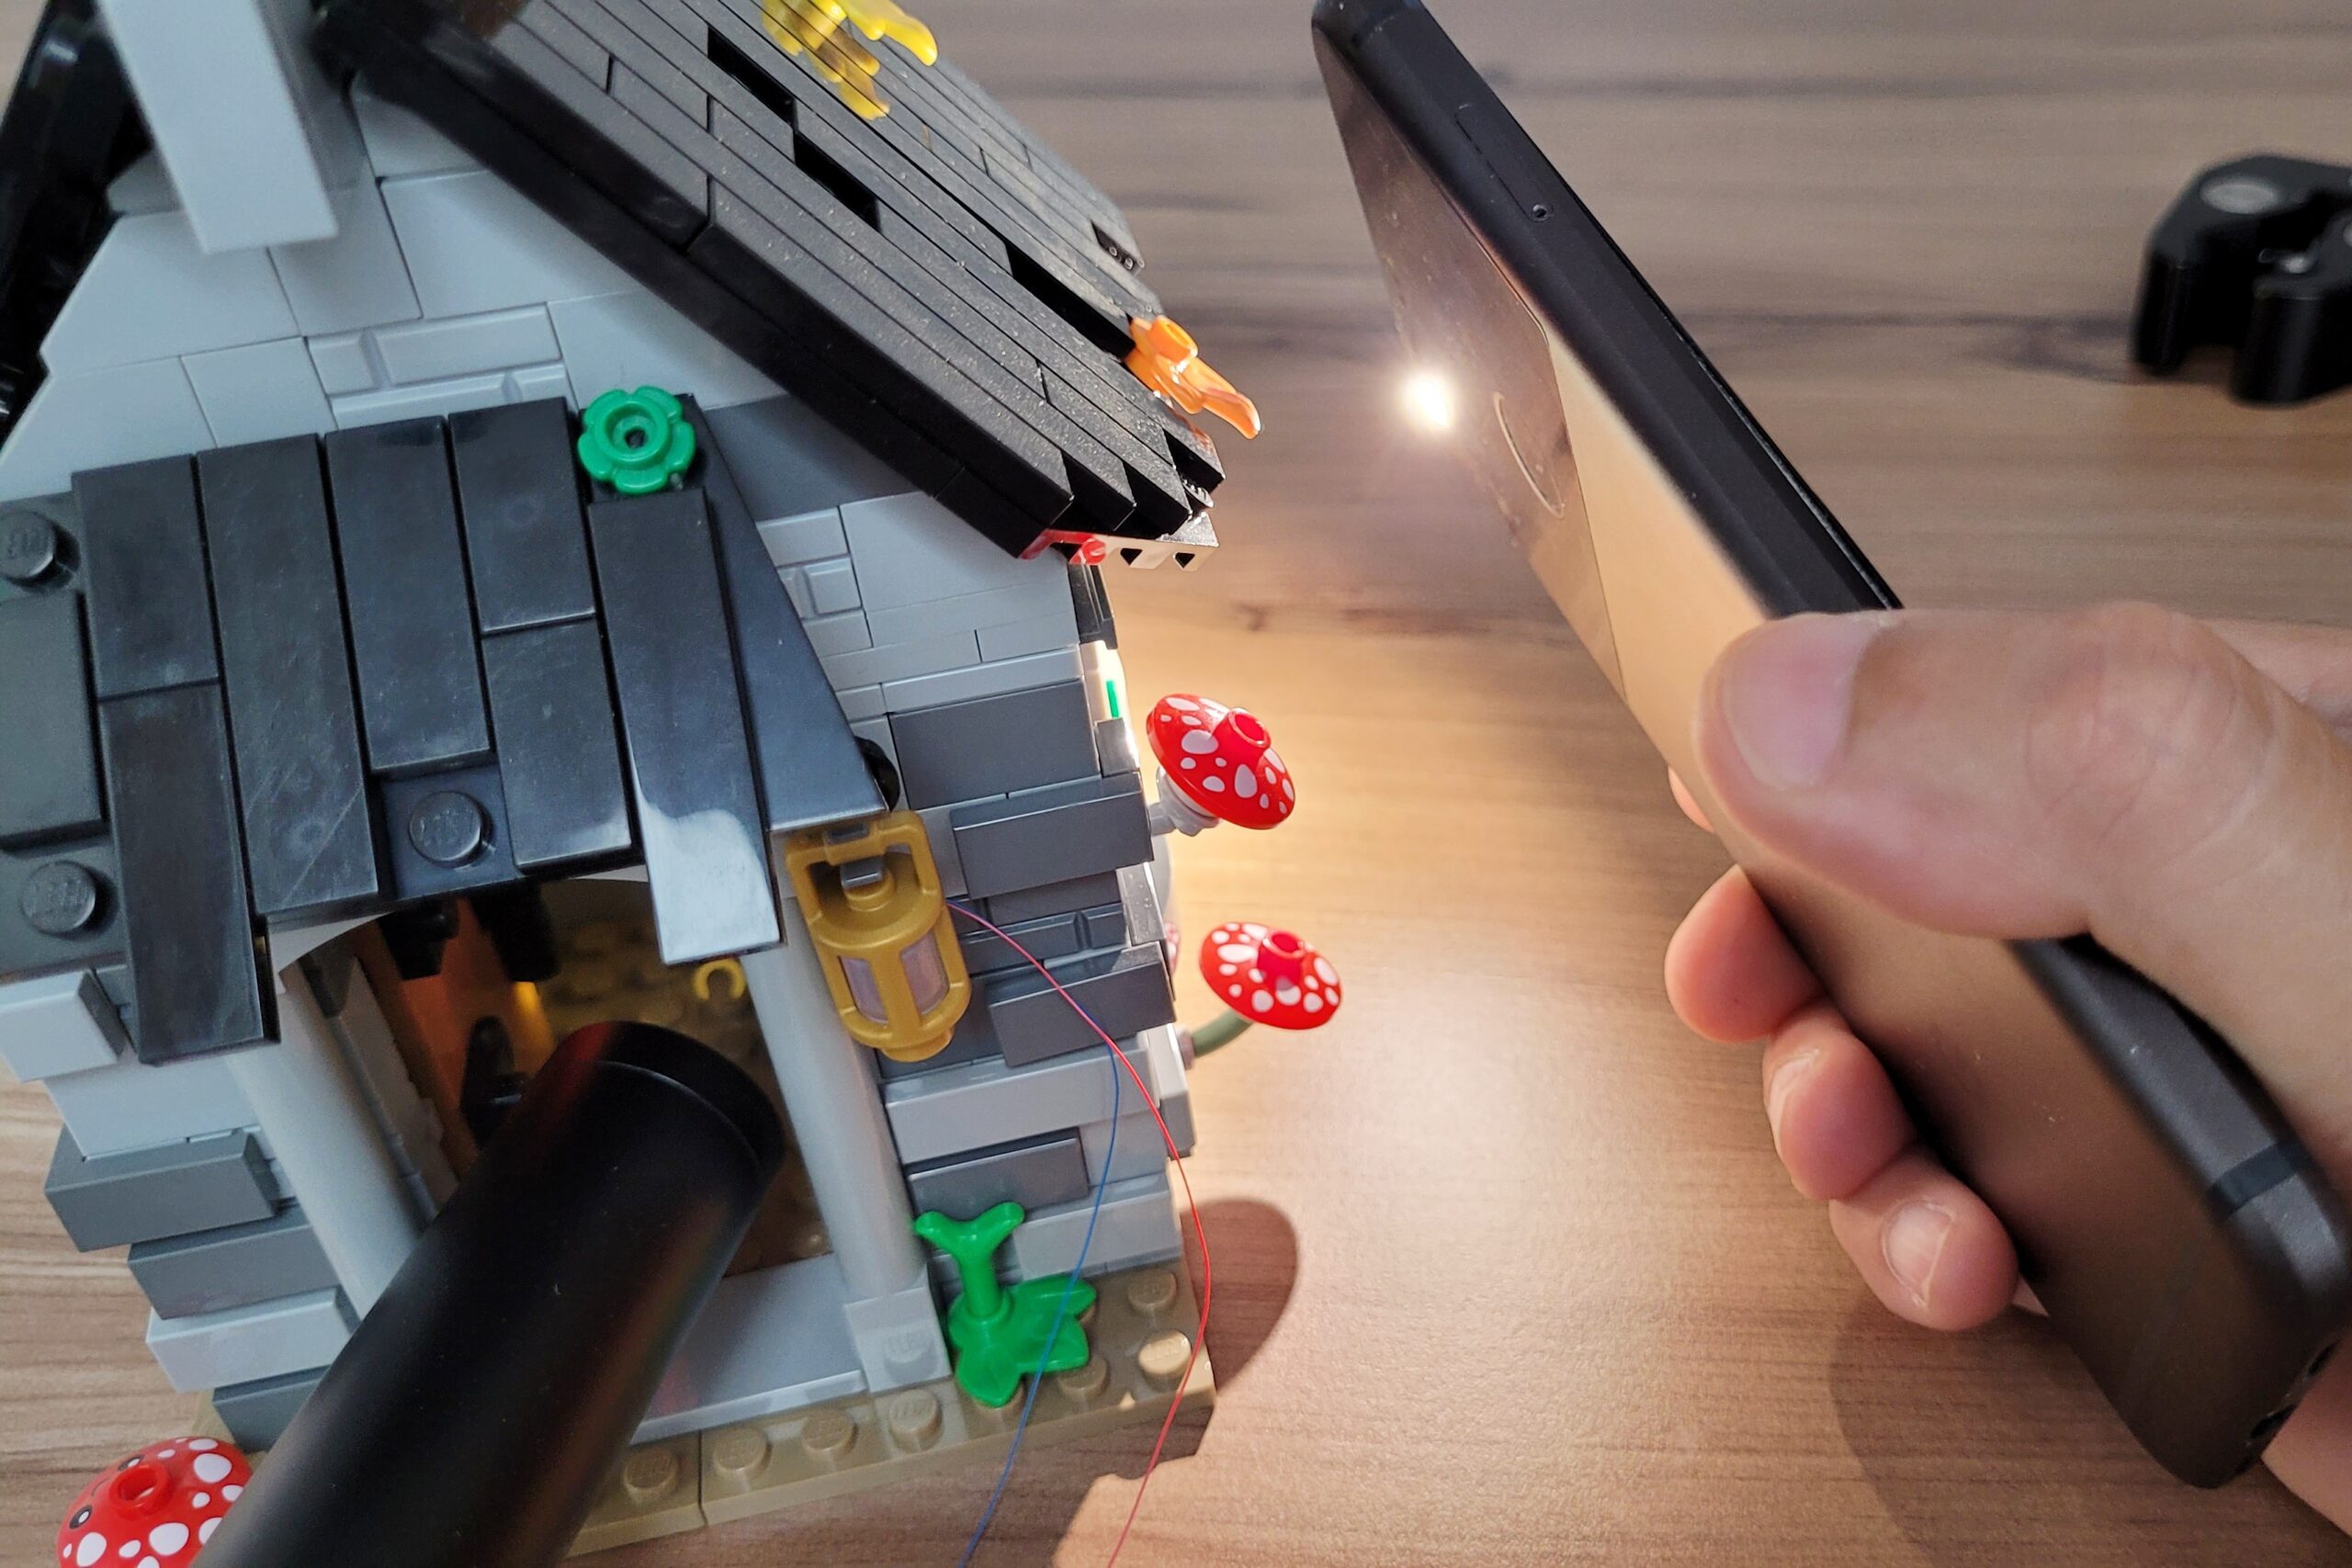 A phone LED light as a light source for LEGO photography